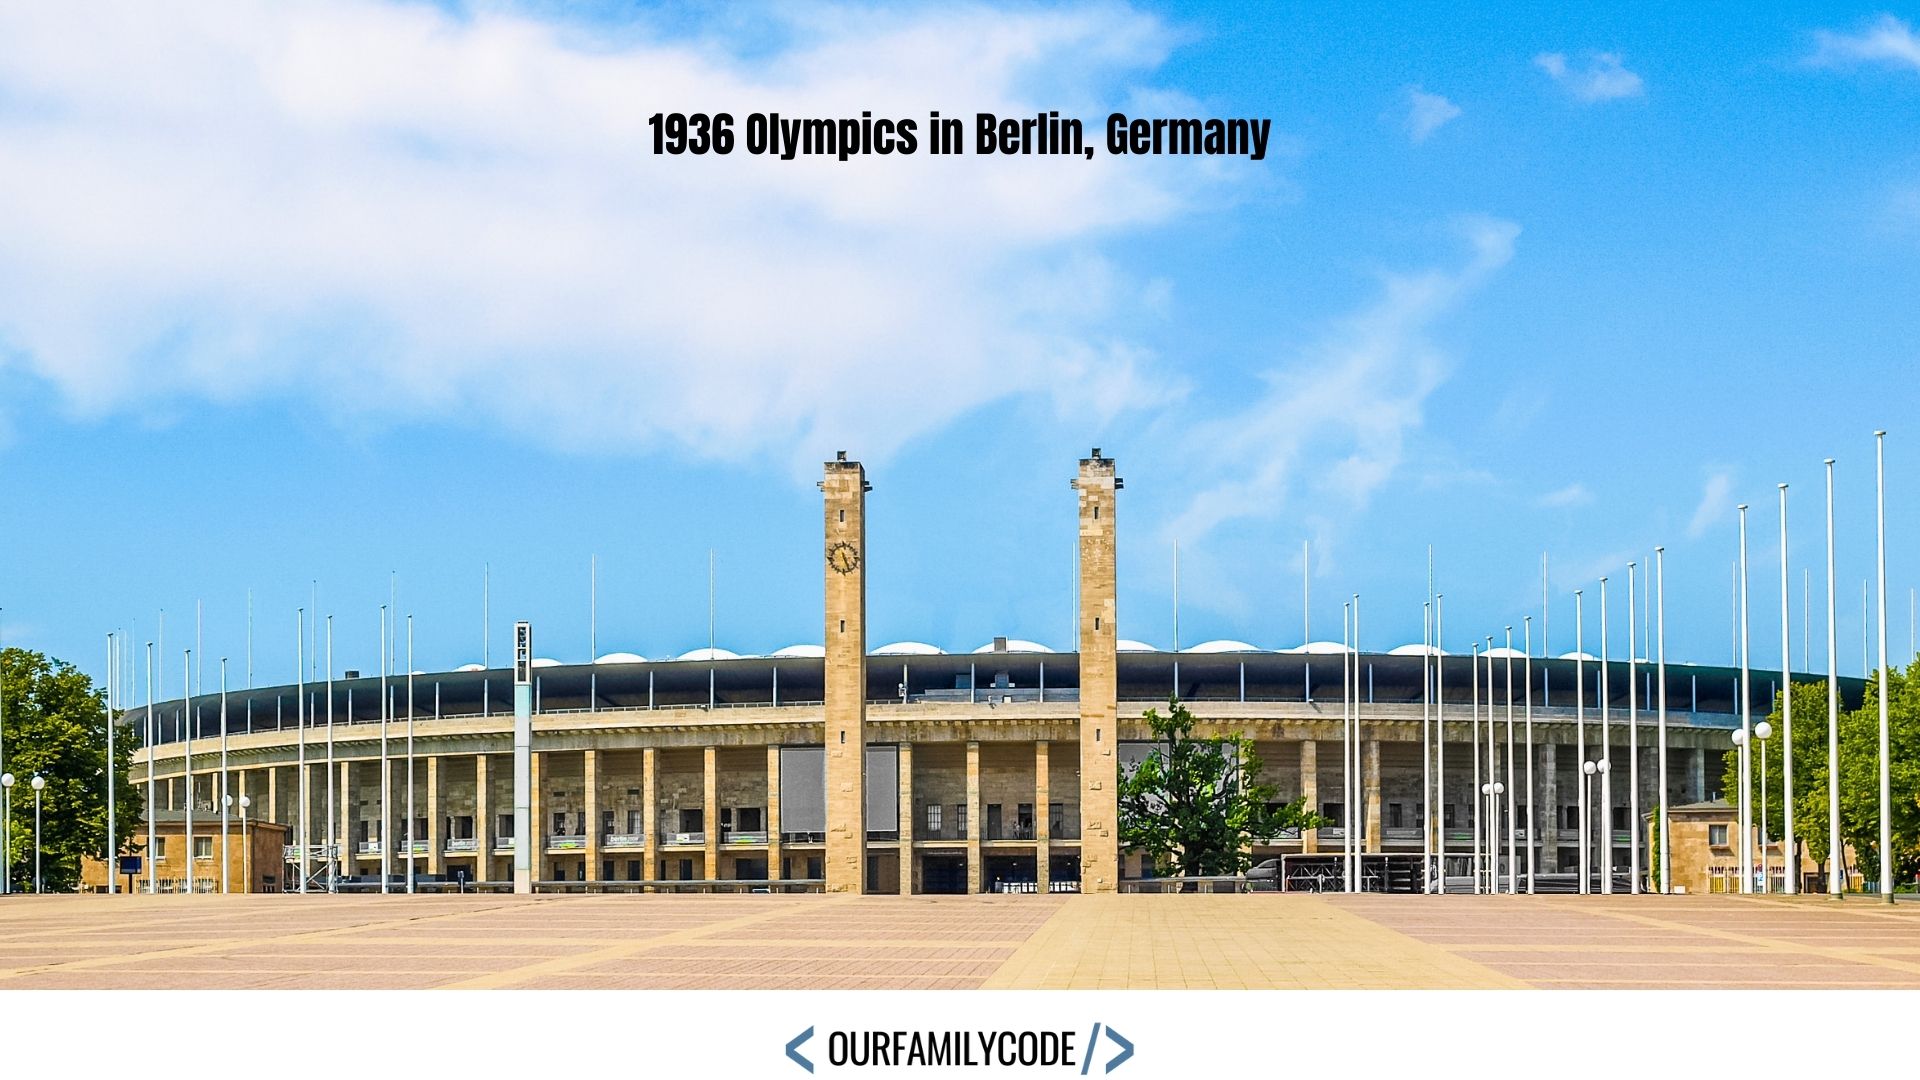 A picture of the Olympiastadion in Berlin, Germany.